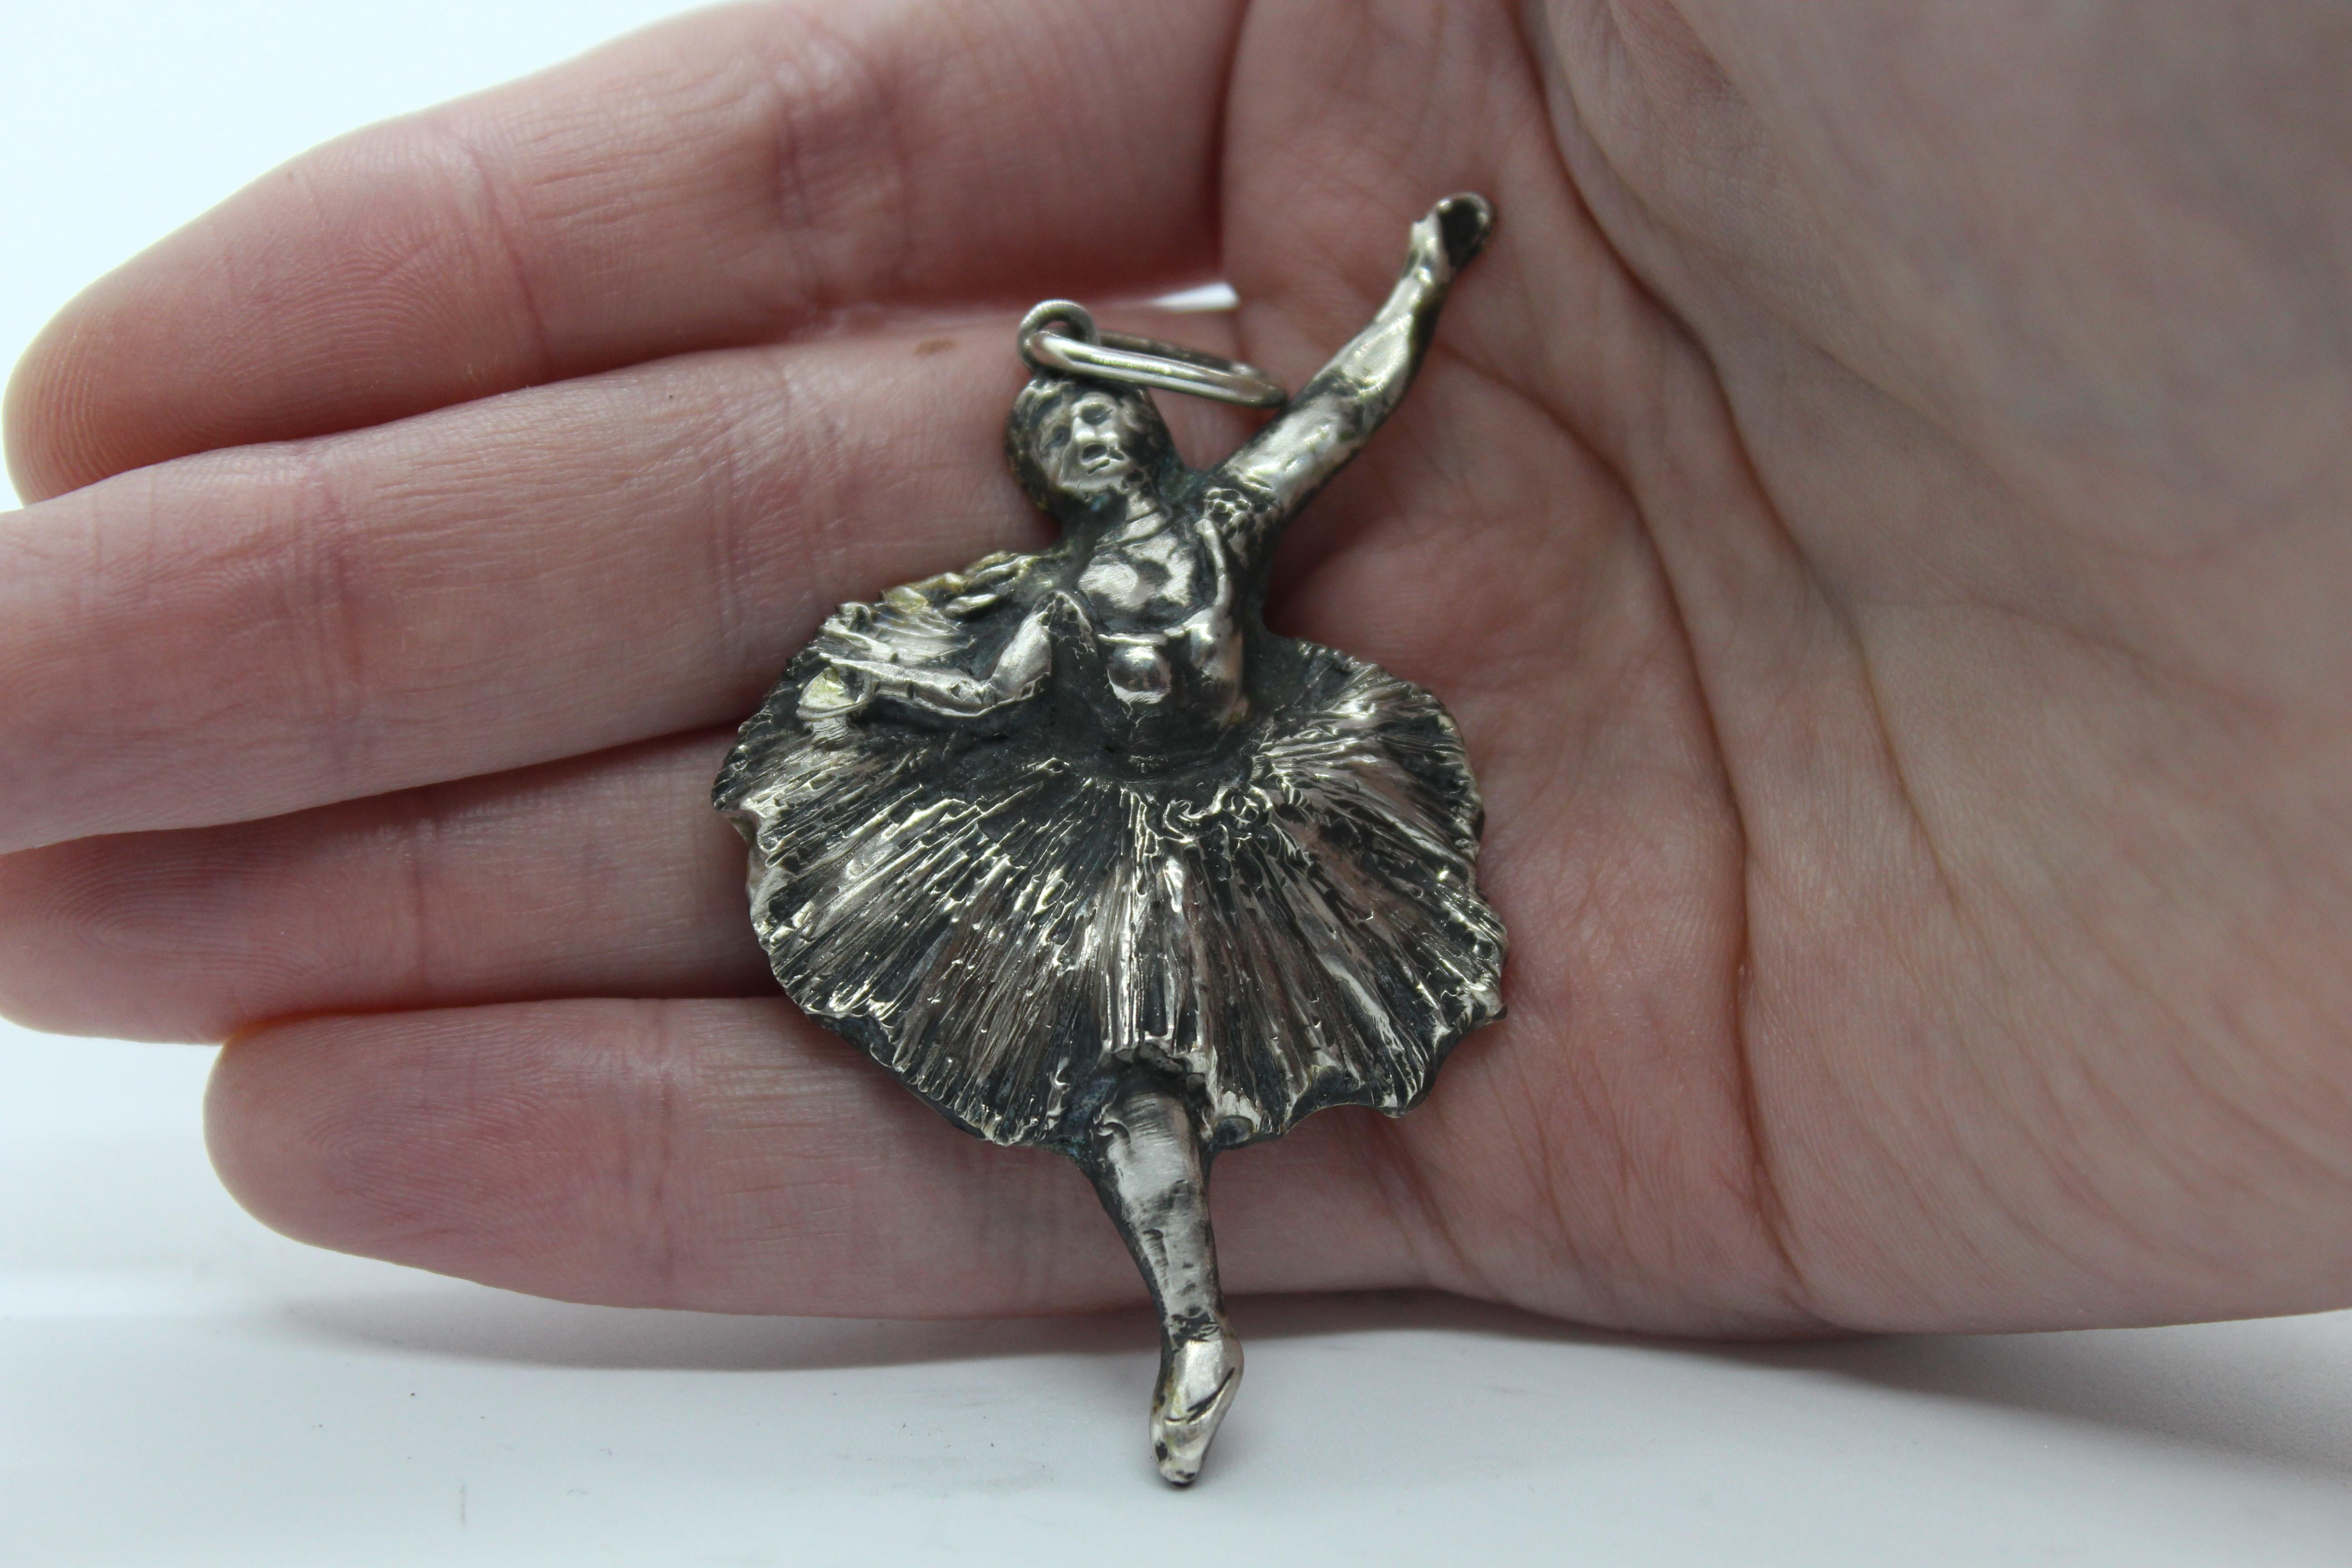 The “Ballerina” pendant is part of our jewelry line “Homage to the ancestors”, inspired by famous oeuvres of great artists. Specifically, this pendant represents one the well- known Ballerinas of Degas. All our sterling silver pieces of jewelry are